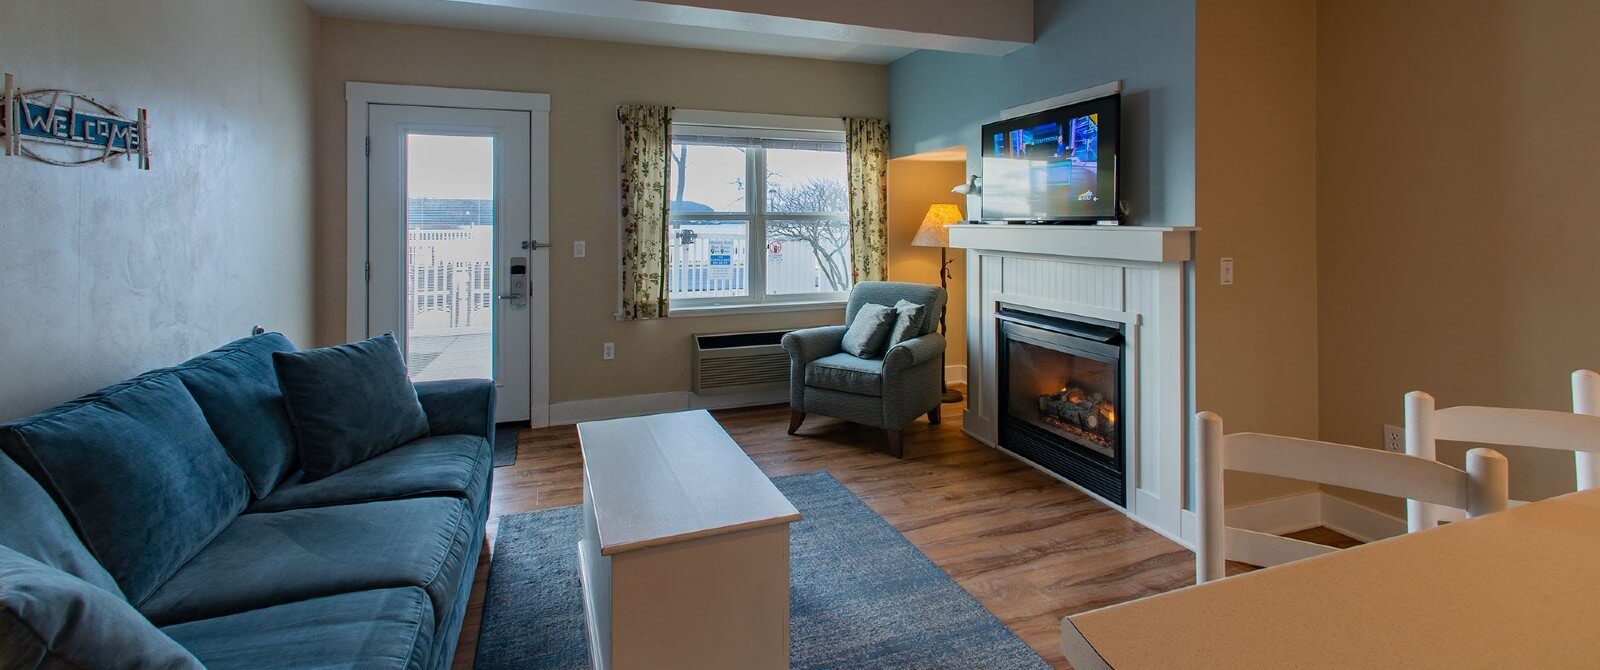 Living room with blue couch and chair, white table, TV over a gas fireplace and doorway to a patio